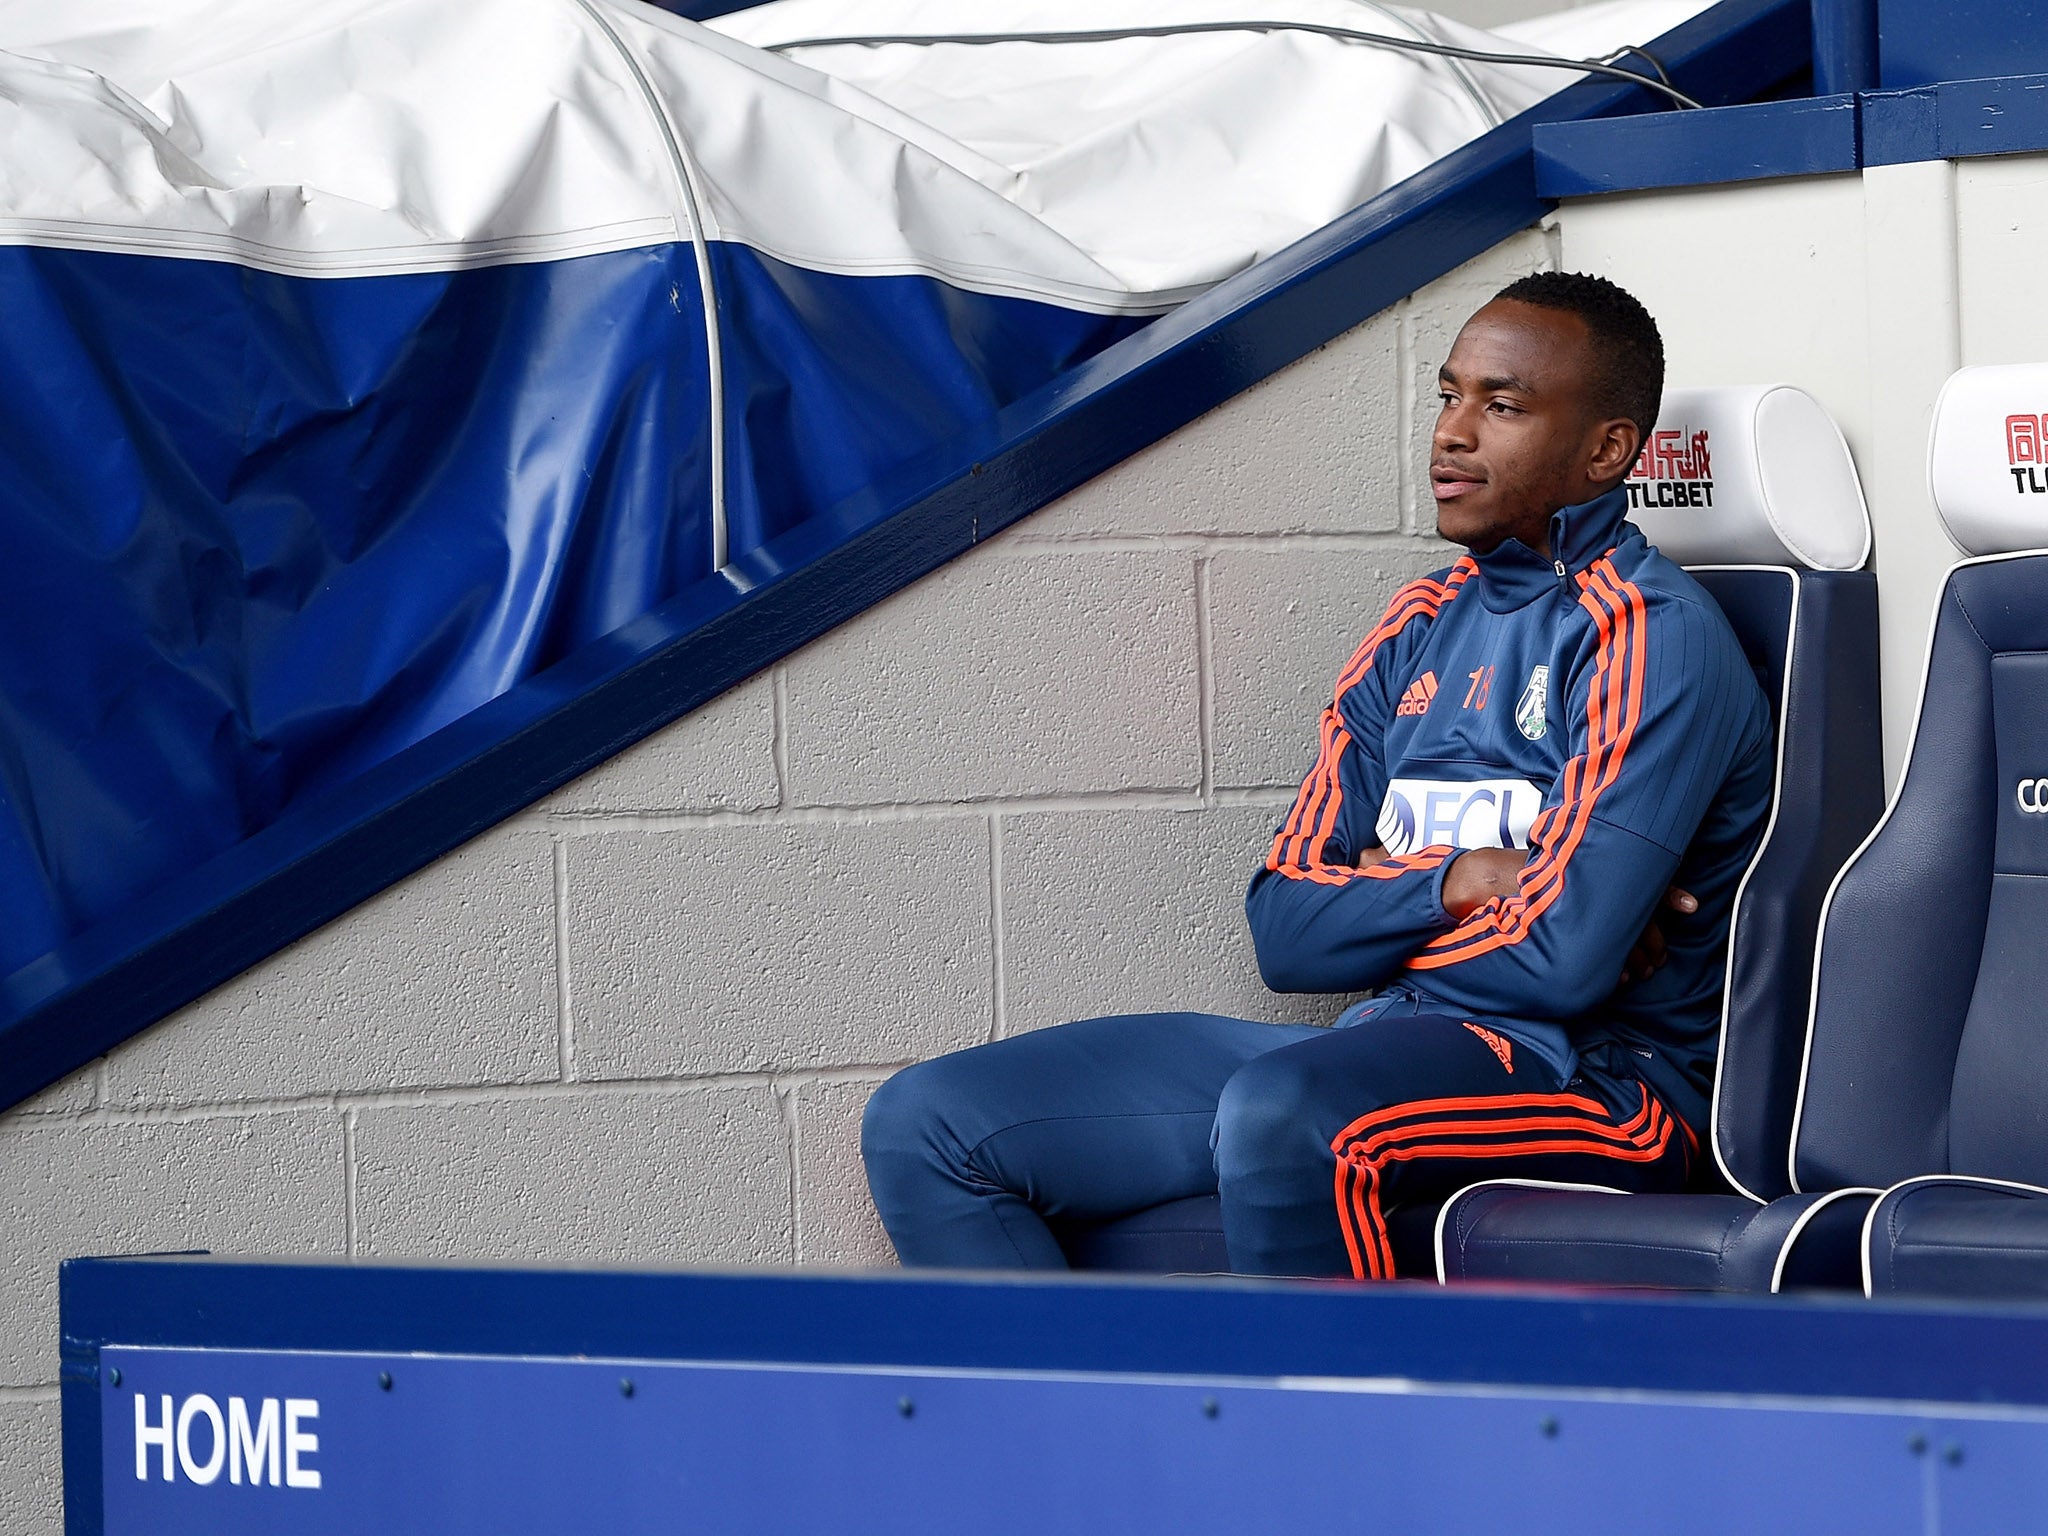 Saido Berhaino on the bench for West Bromwich Albion